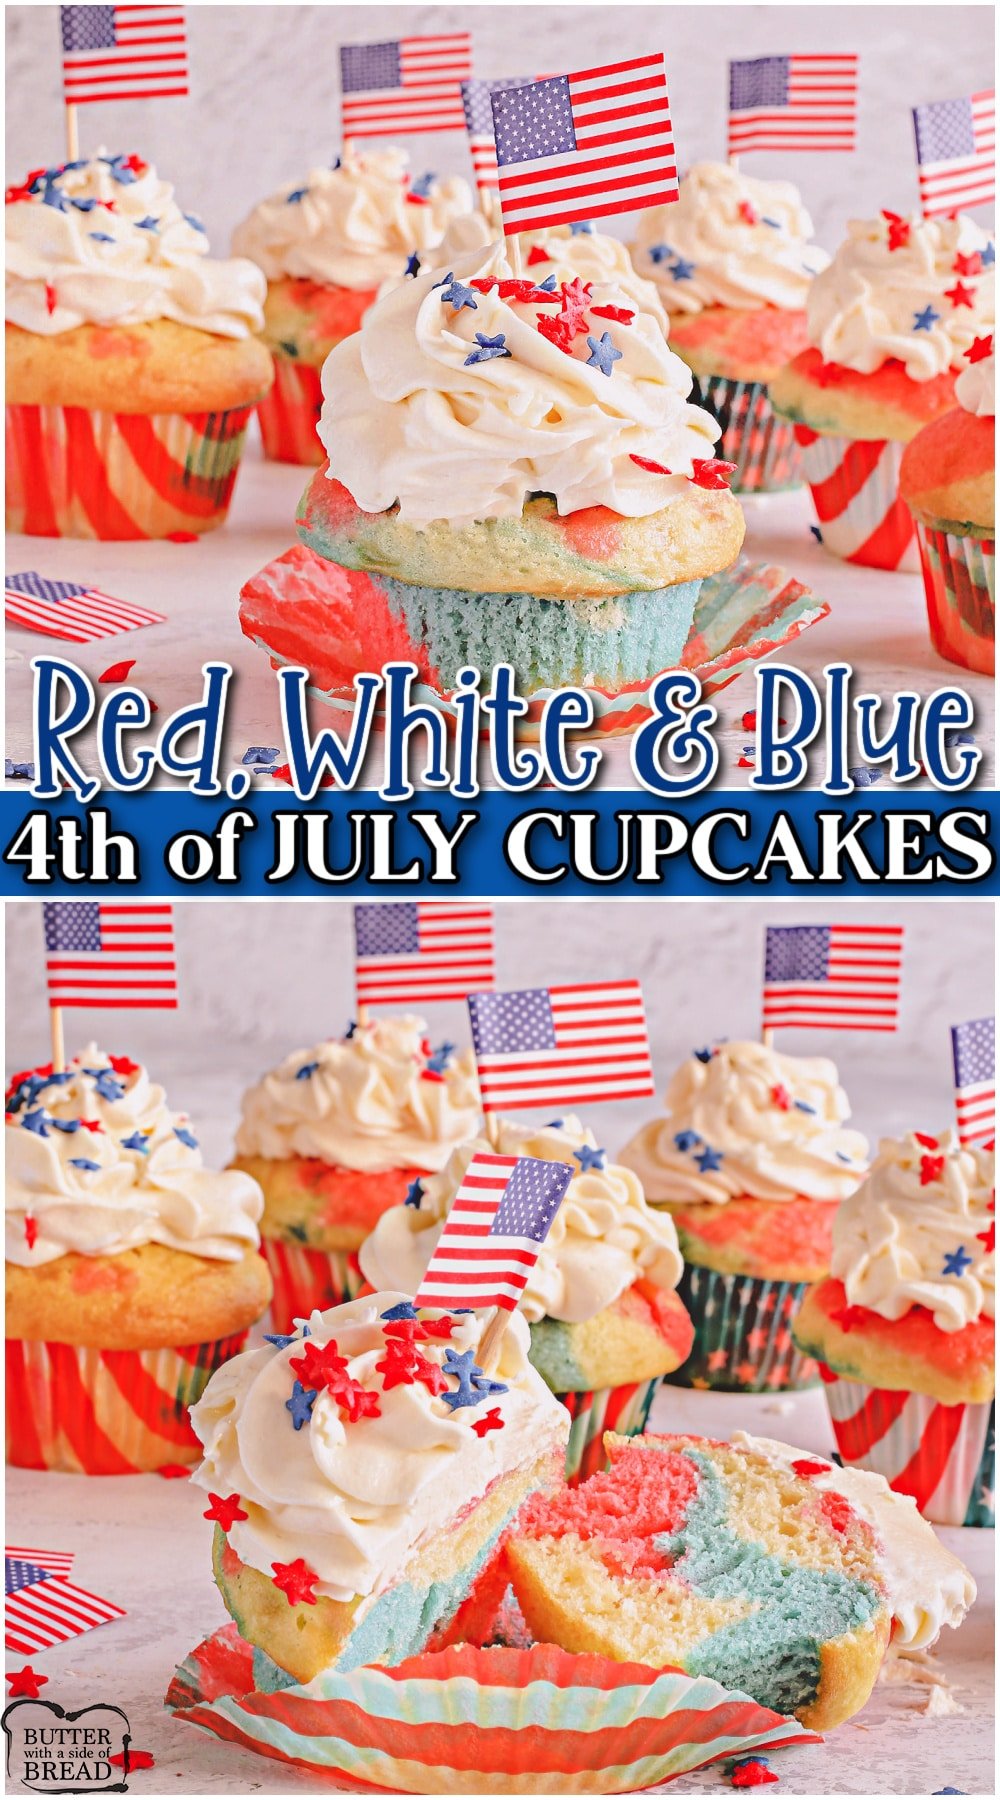 Red, White and Blue Swirl Cupcakes are a delightfully festive patriotic treat! Patriotic swirl cupcakes are a fun dessert to bring to your next 4th of July celebration!